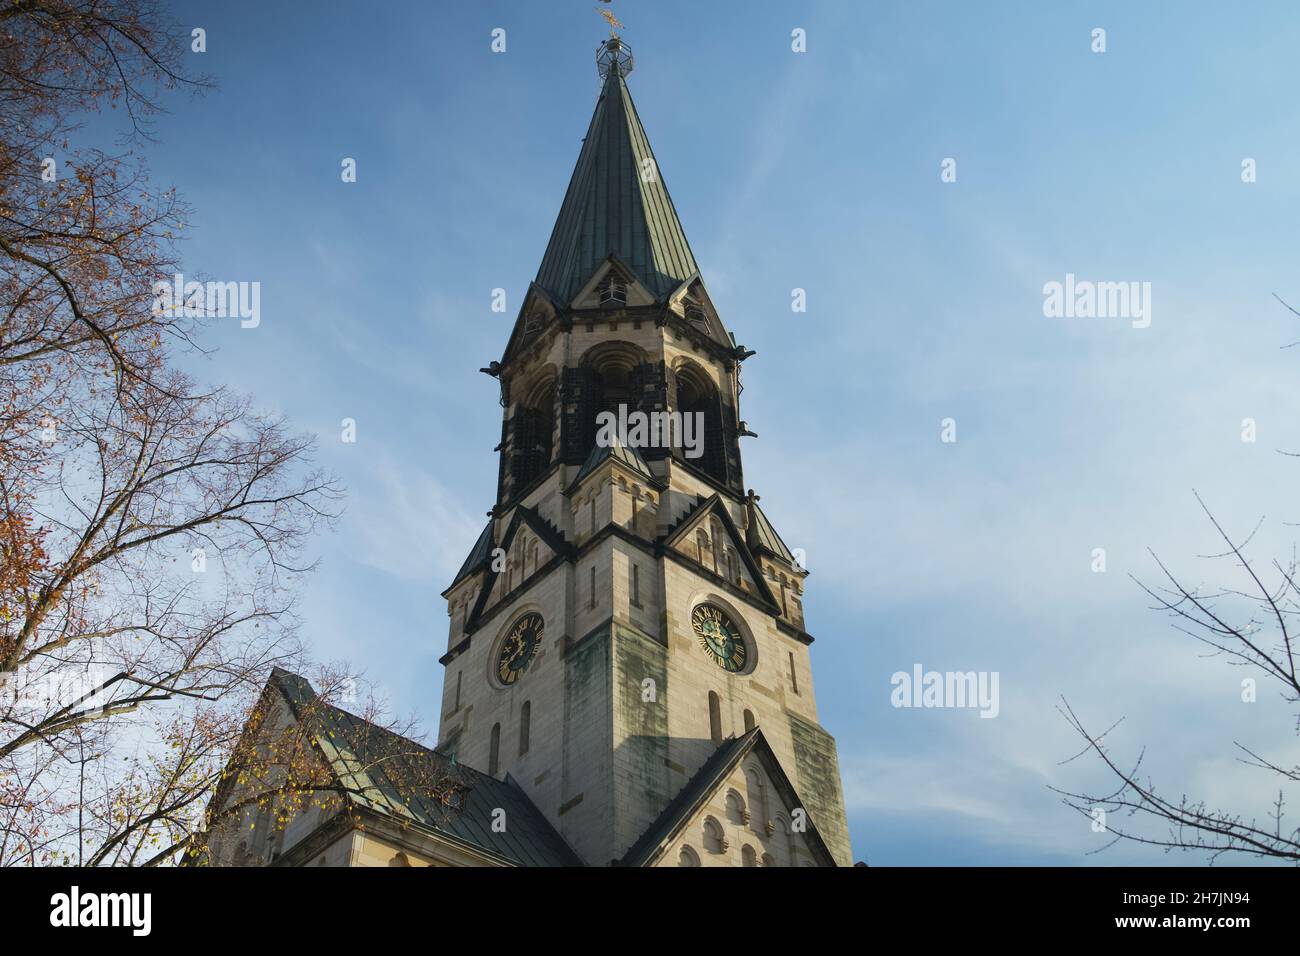 Johannes-Basilika or Basilica of St. John the Baptist, a church in Neukoelln, Berlin on a sunny fall day. It is the Catholic cathedral seat of the Mil Stock Photo